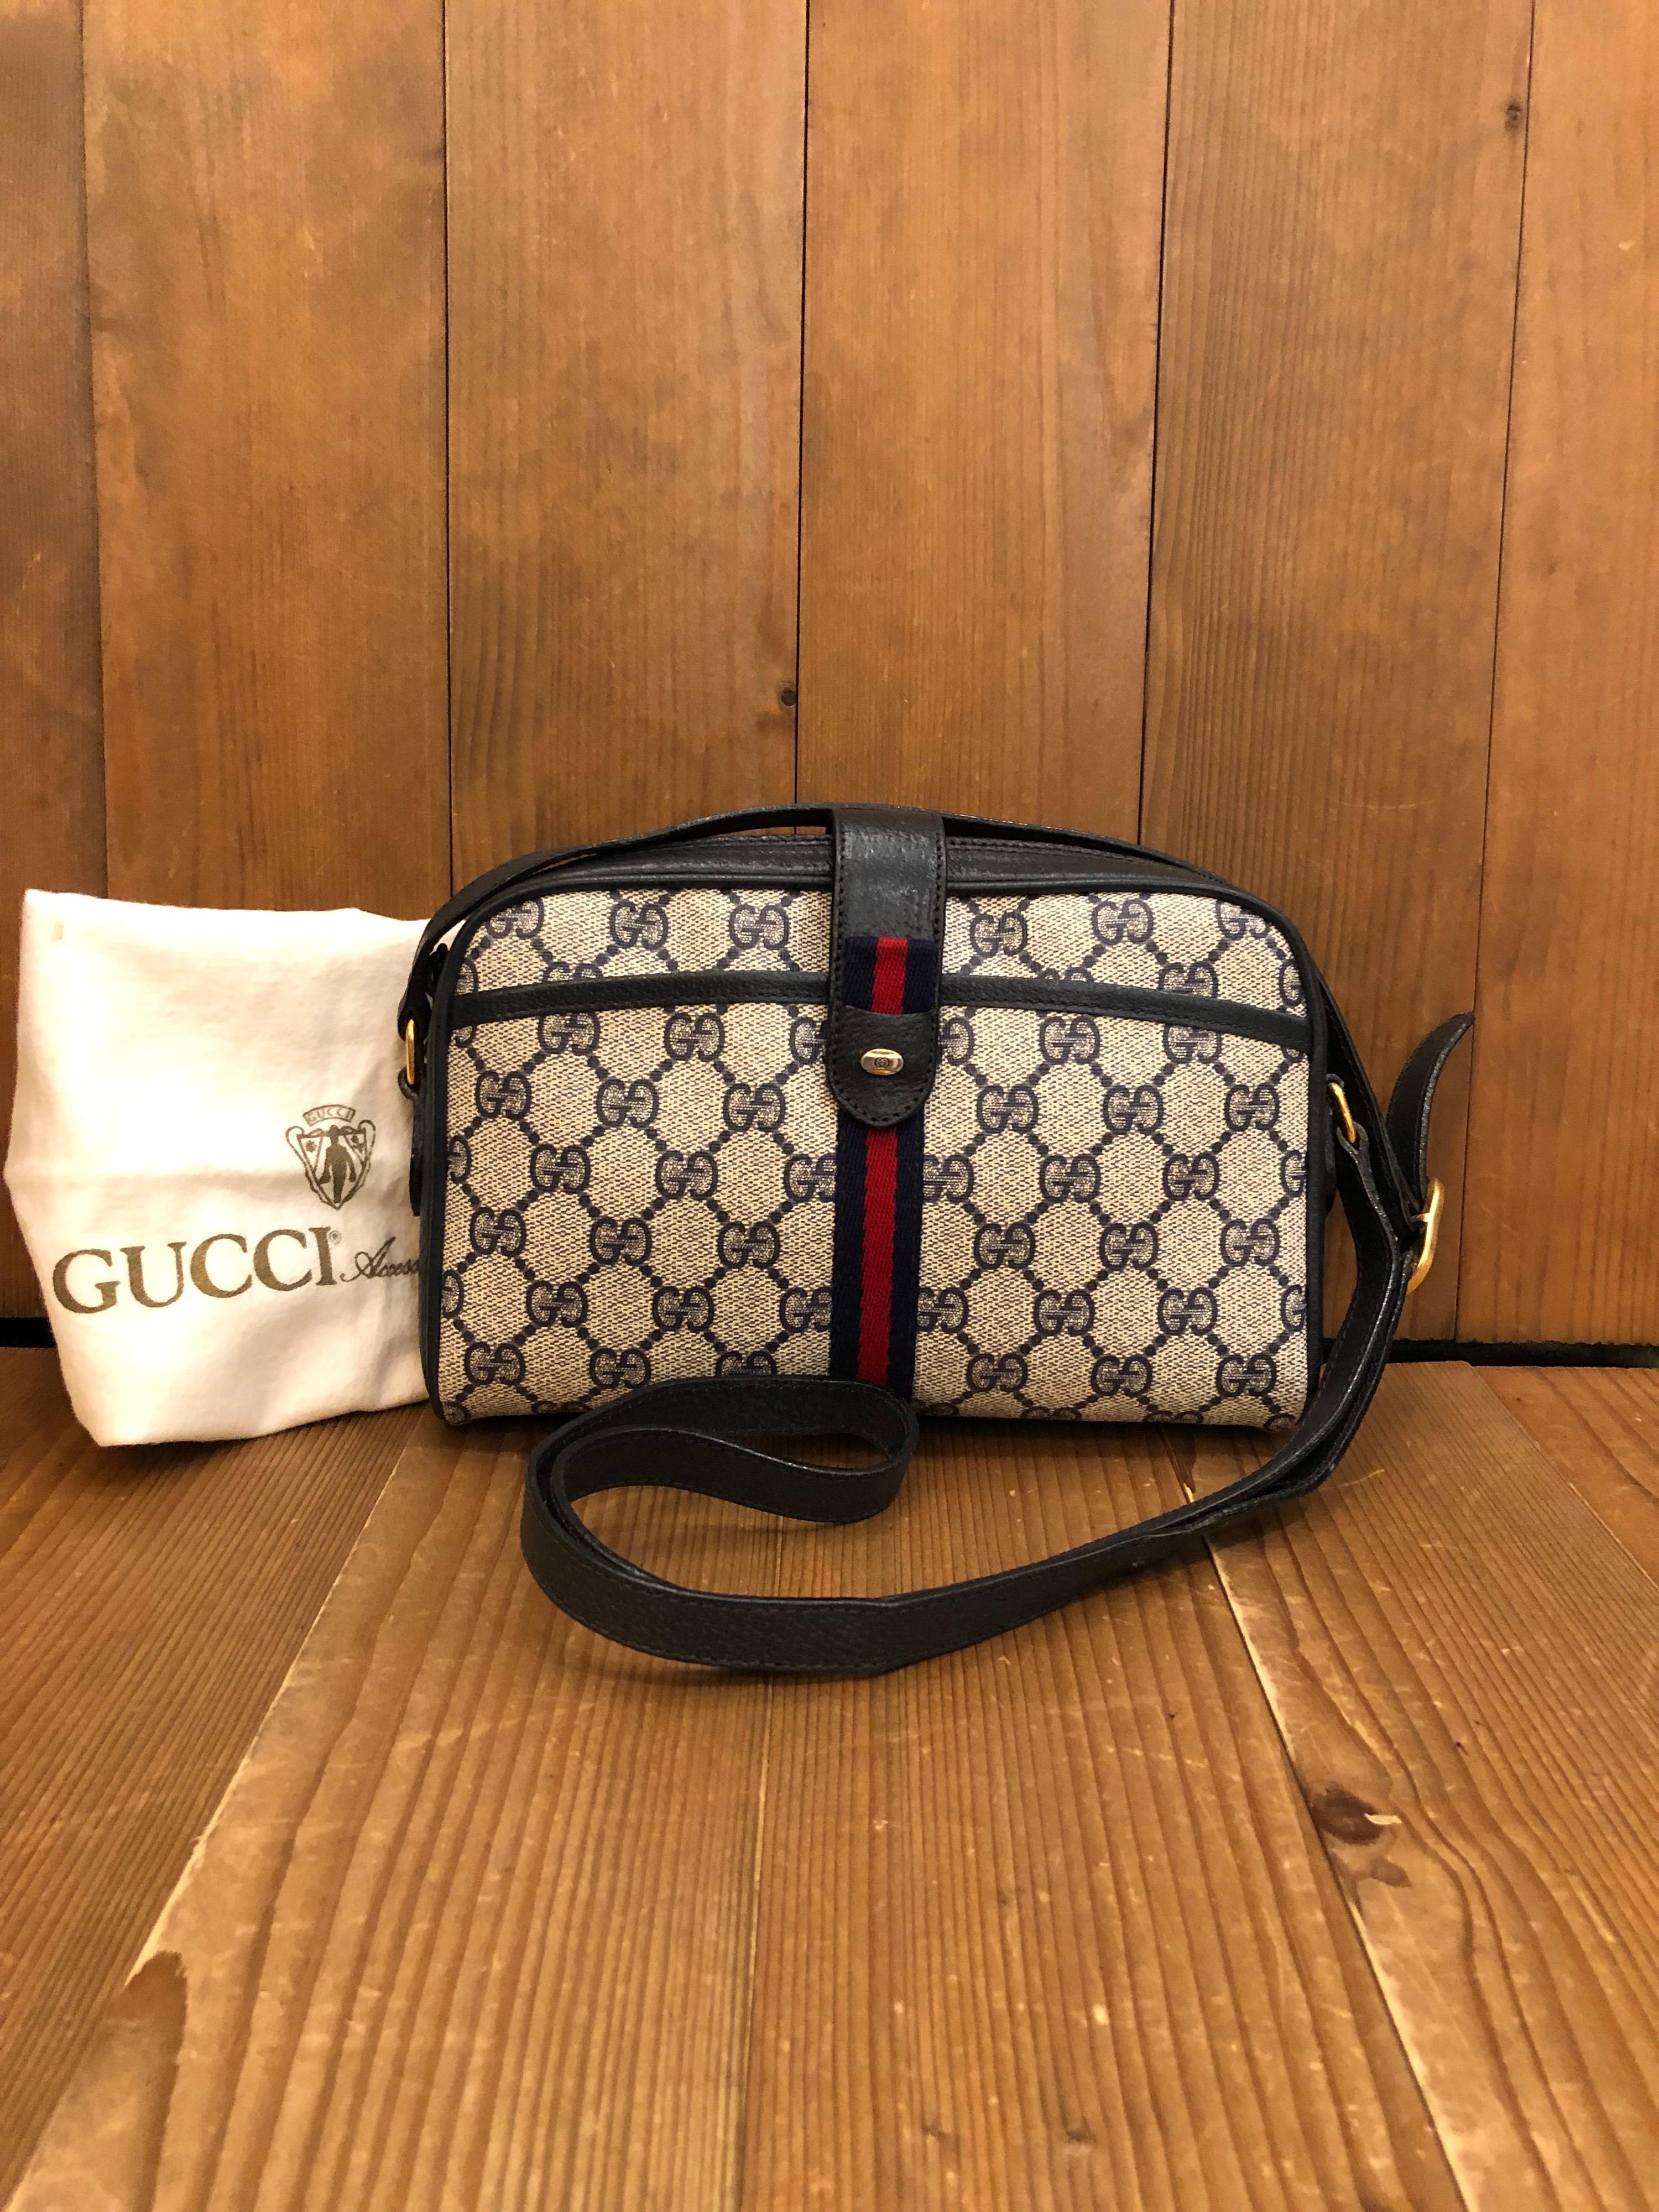 1980s Gucci web small crossbody bag from the 1980s in navy monogram canvas with iconic Gucci navy/red web featuring one front zip pocket with snap closure. Compact in size. Made in Italy. Measures approximately 8.5 x 5.5 x 1.5 Drop 19 inches. Comes